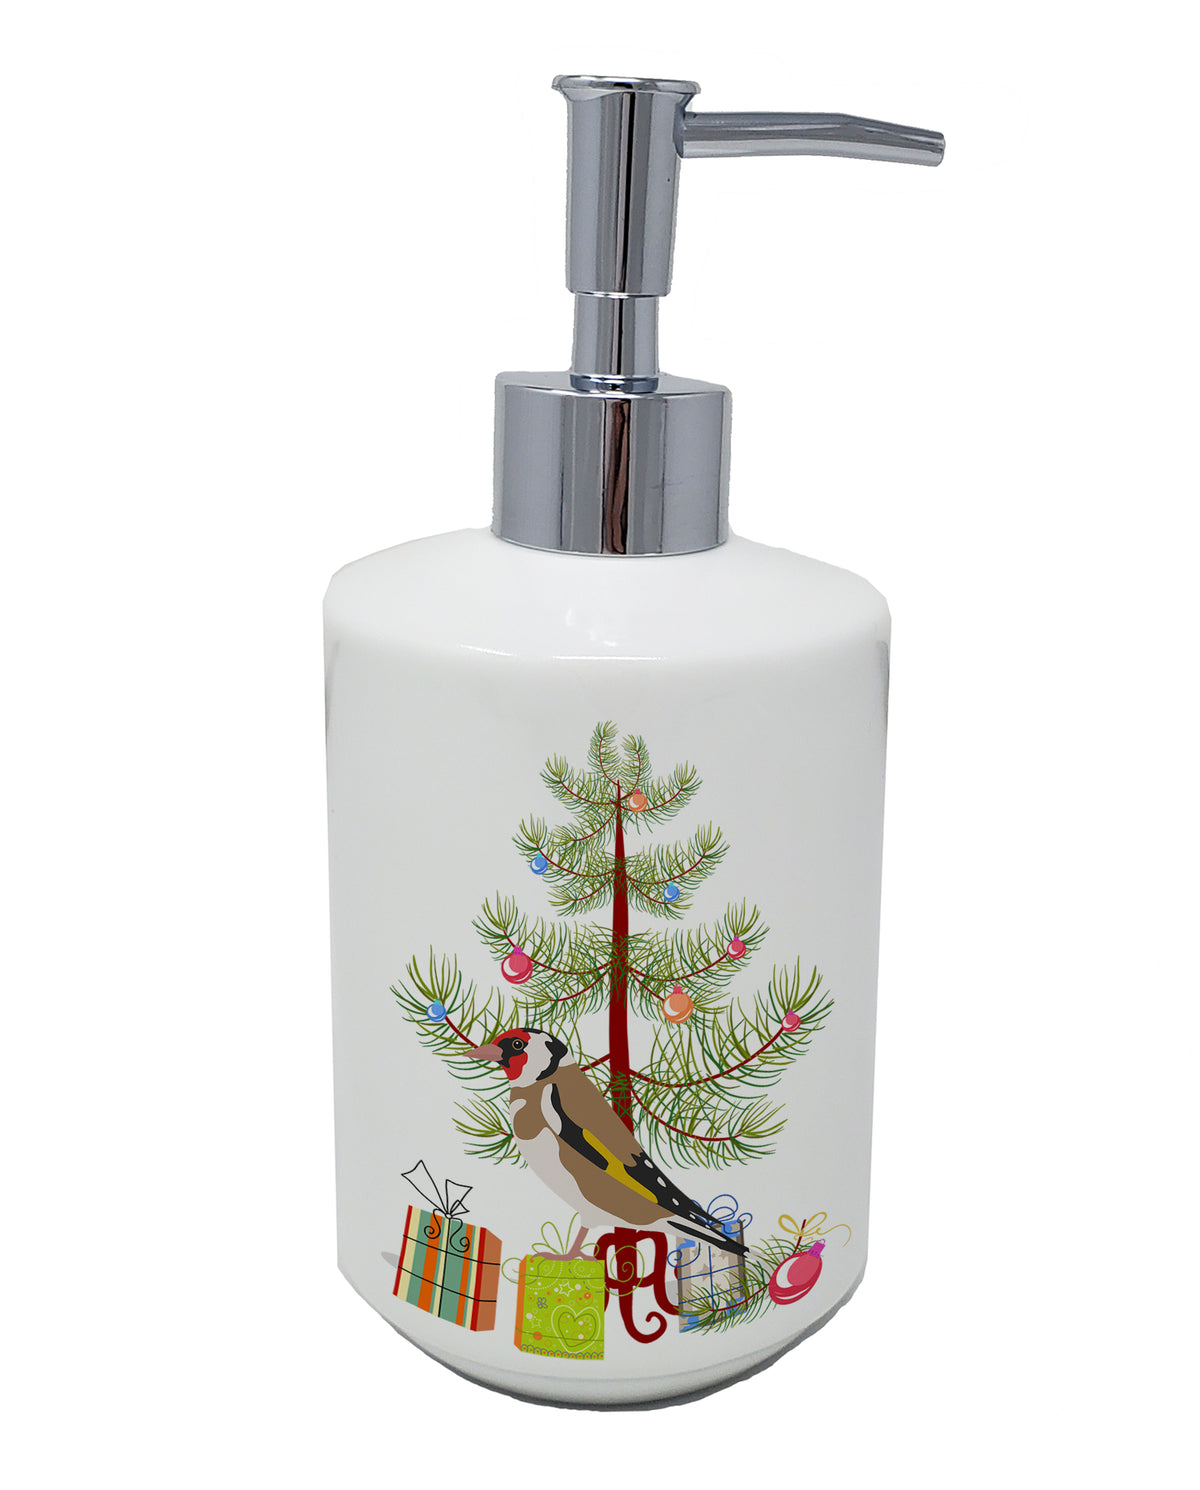 Buy this Gold Finch Merry Christmas Ceramic Soap Dispenser